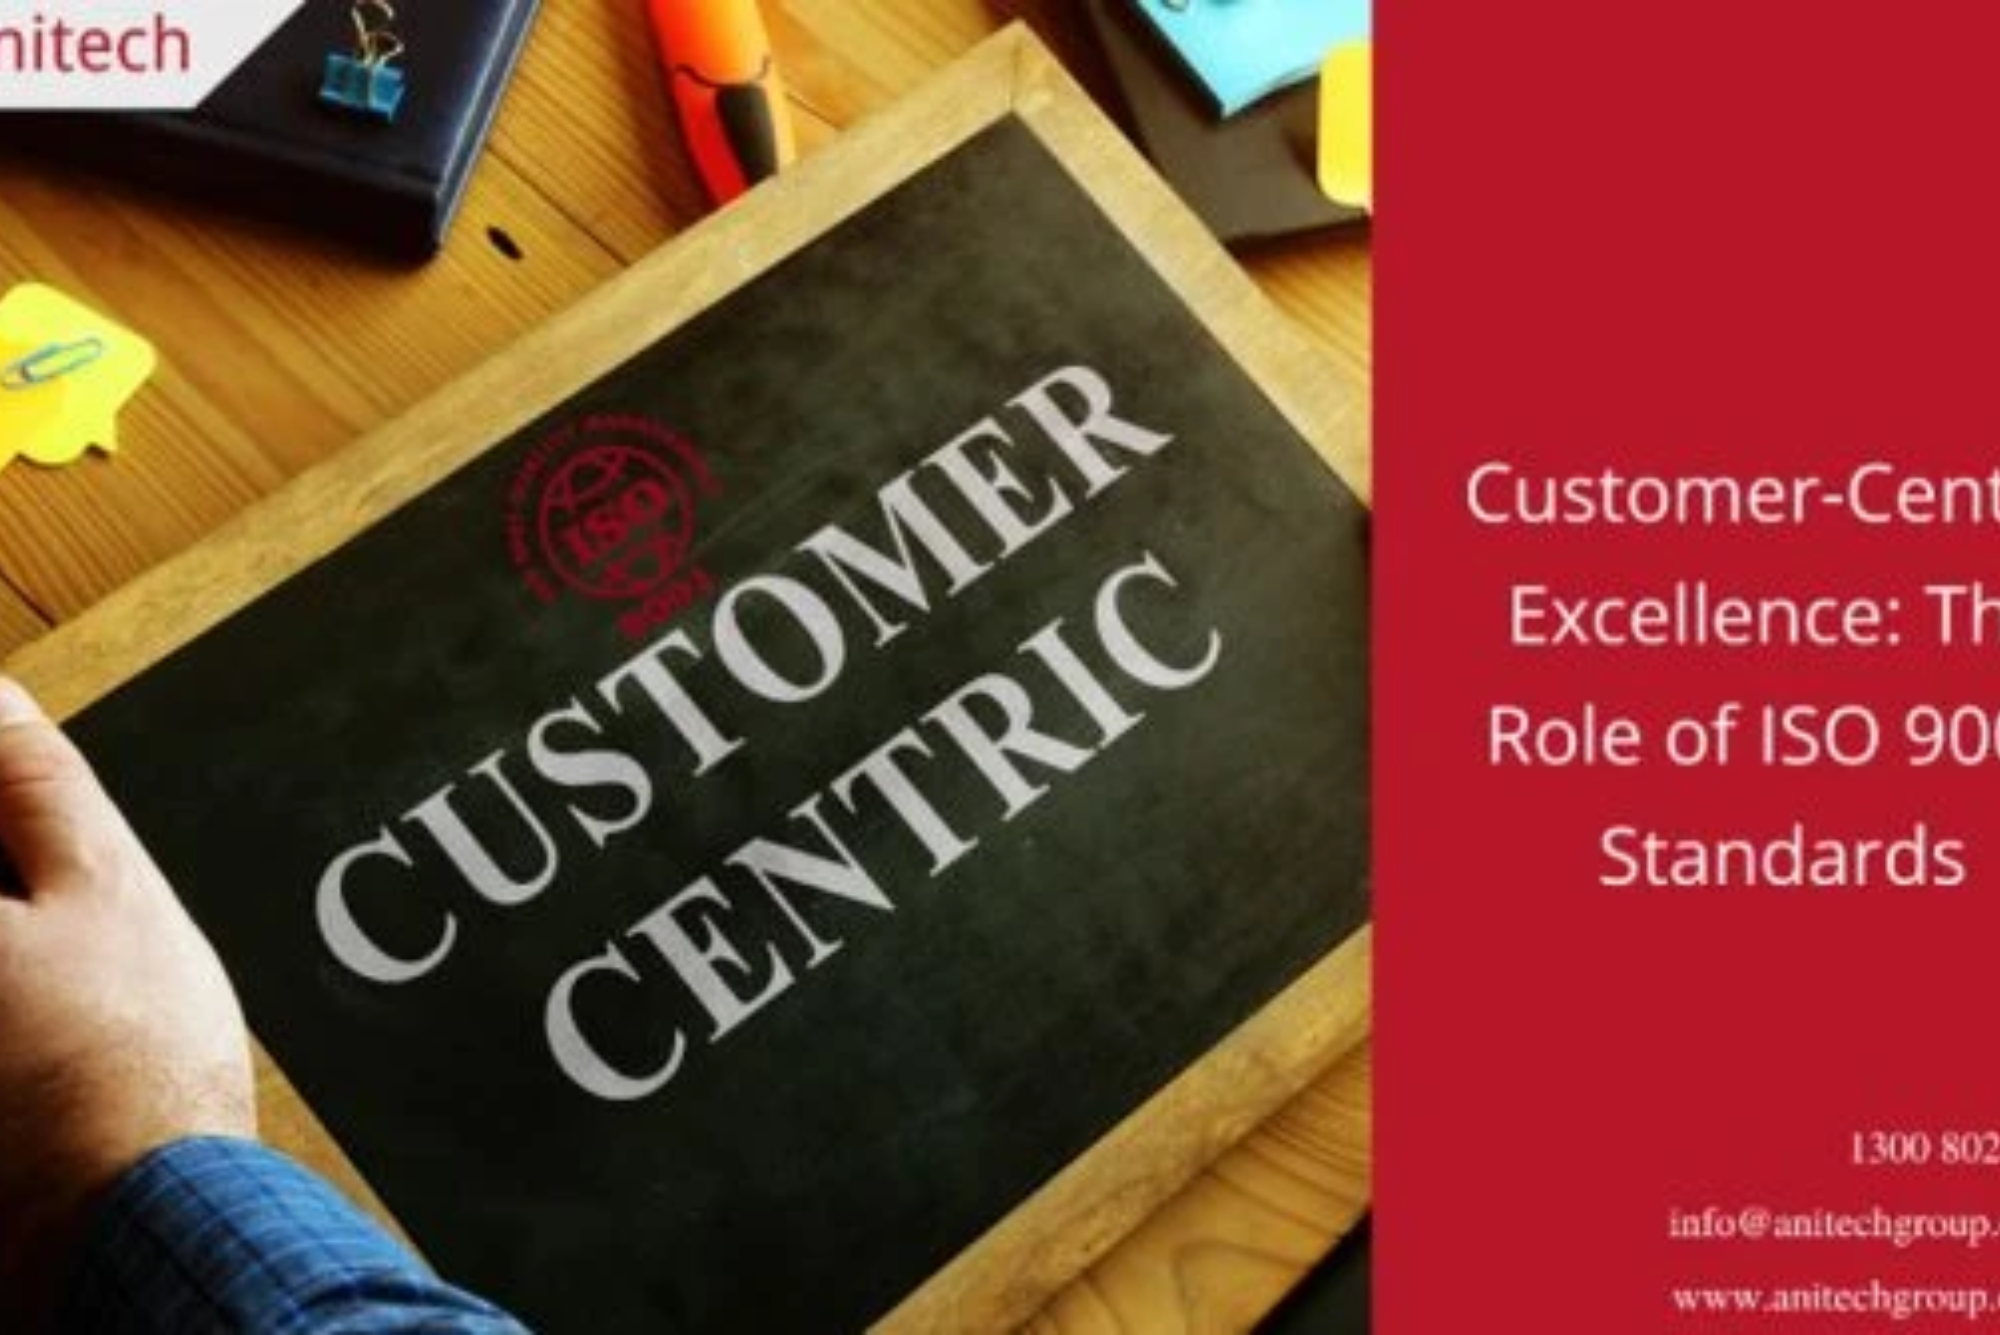 Standard for Quality and Customer-Centric Excellence